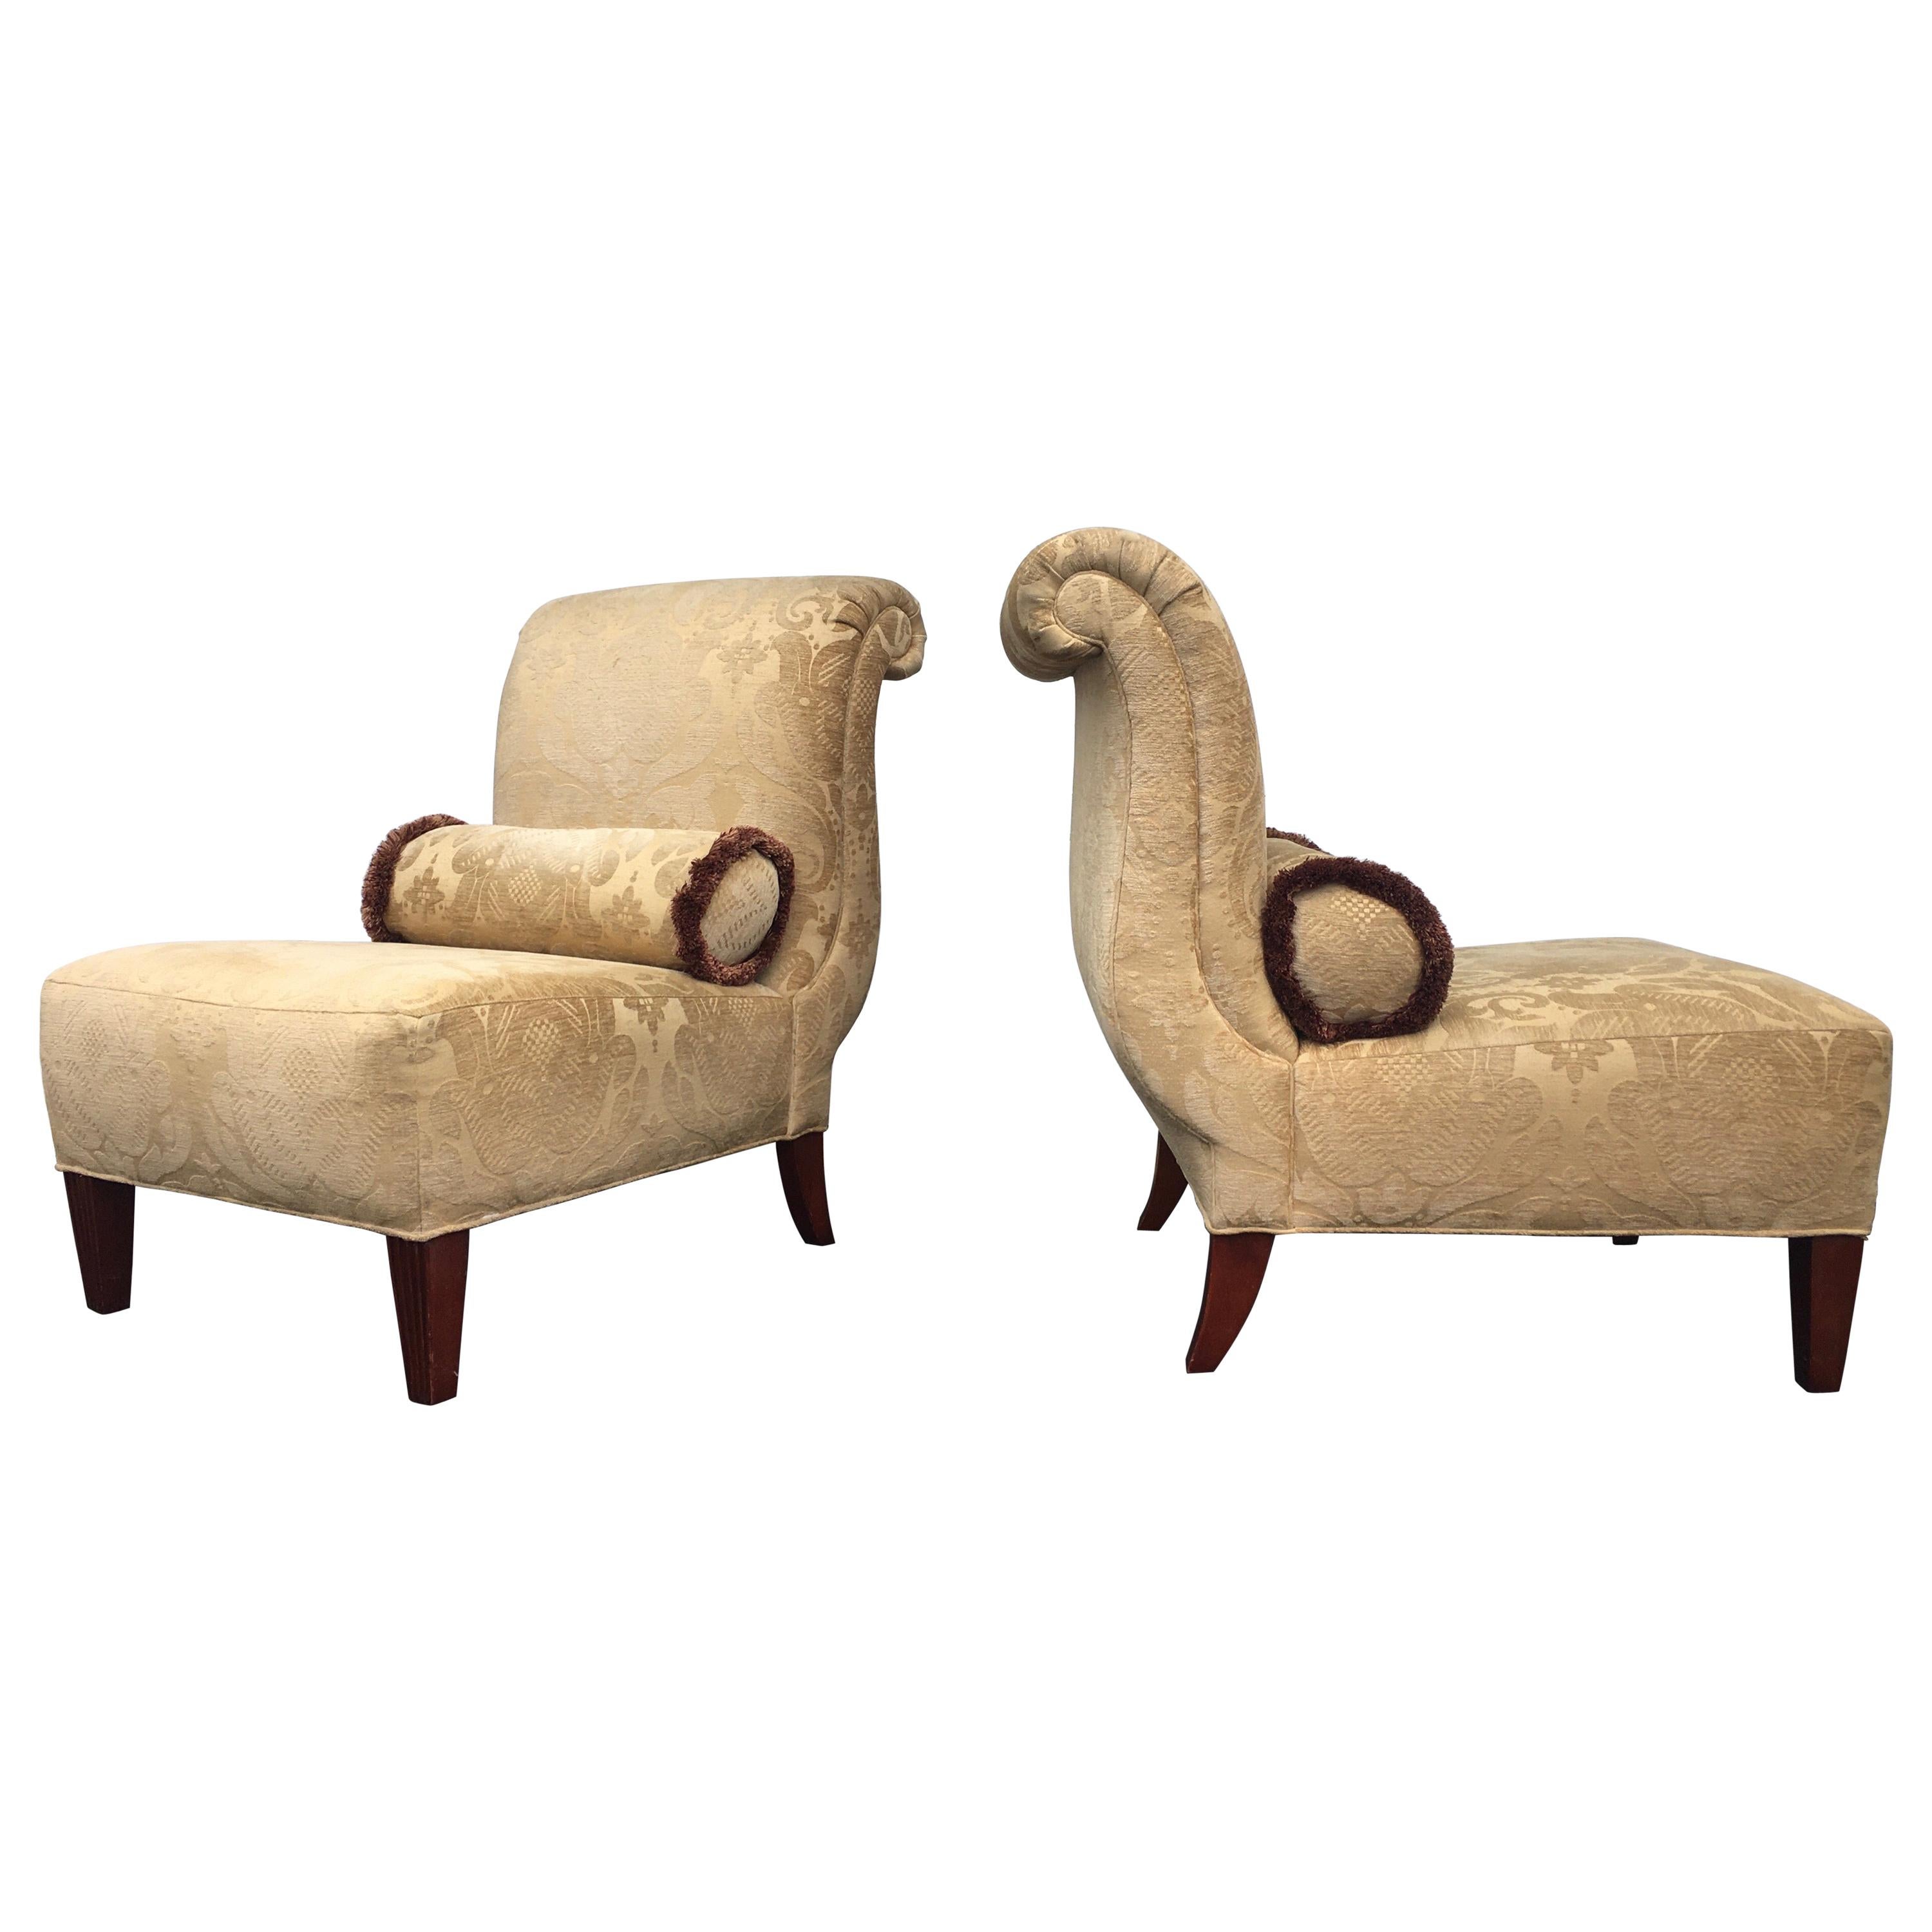 Barbara Barry for Baker Furniture Damask Slipper Chairs, Pair